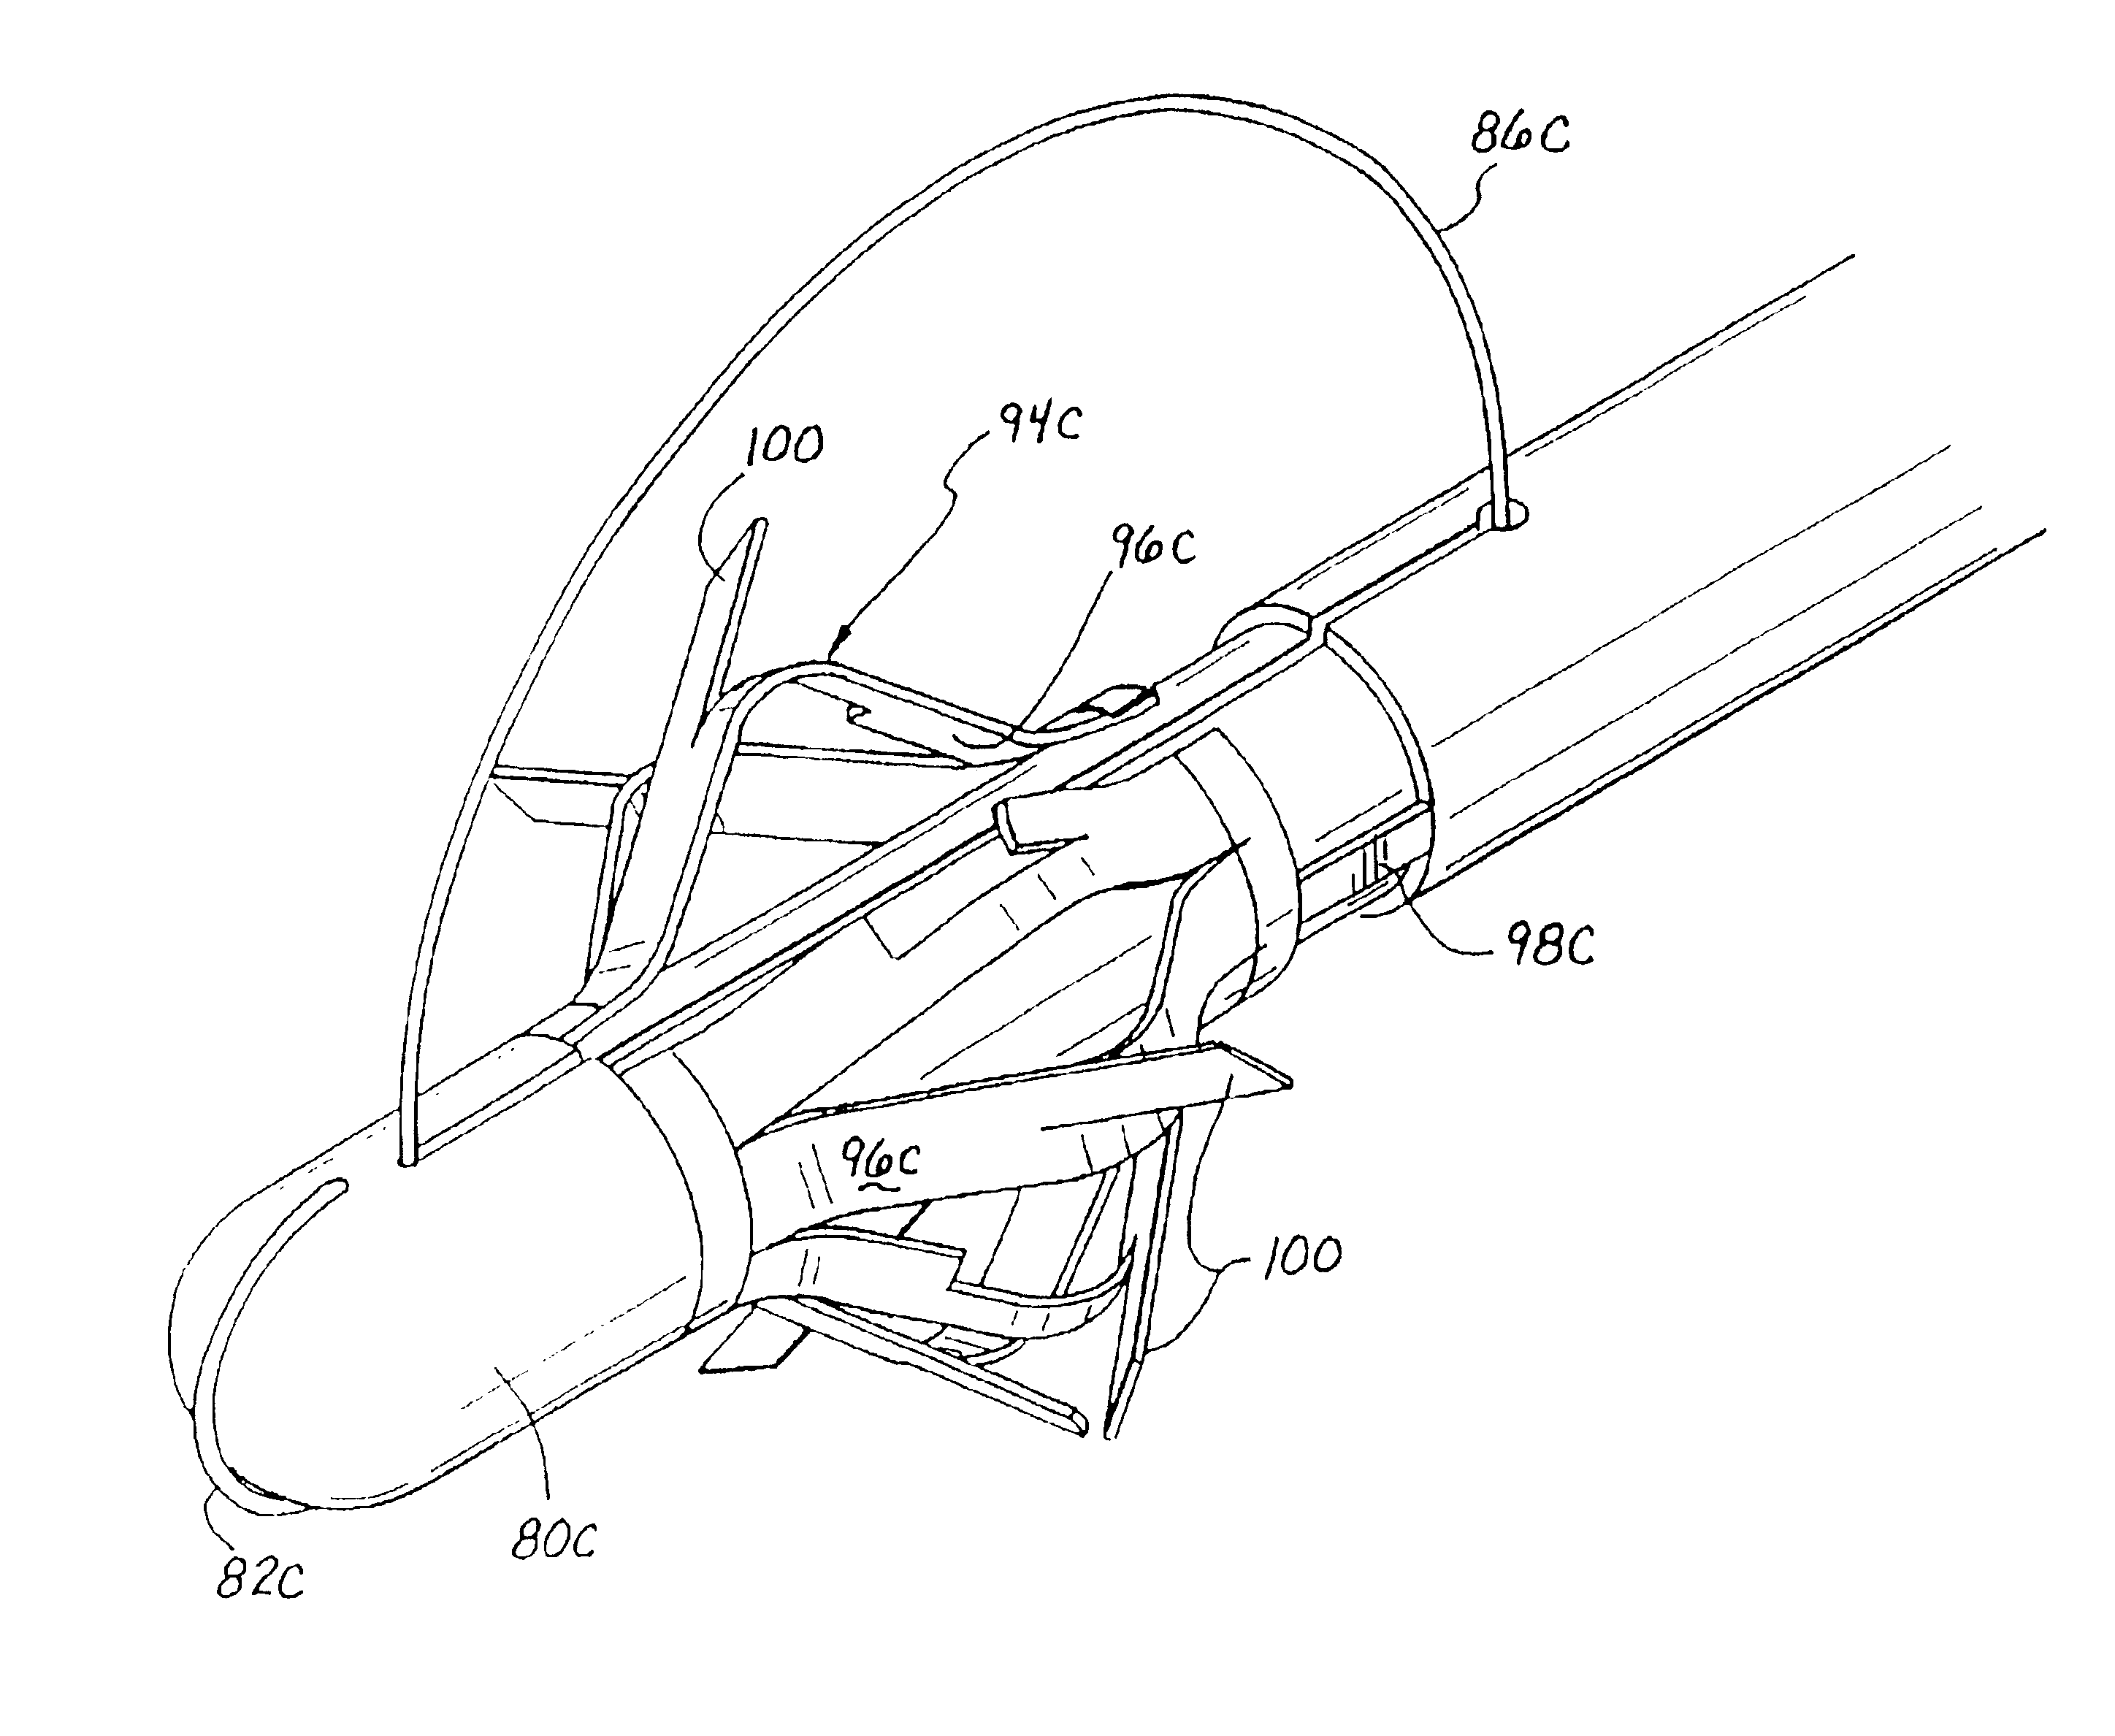 Methods and apparatus for securing medical instruments to desired locations in a patient's body